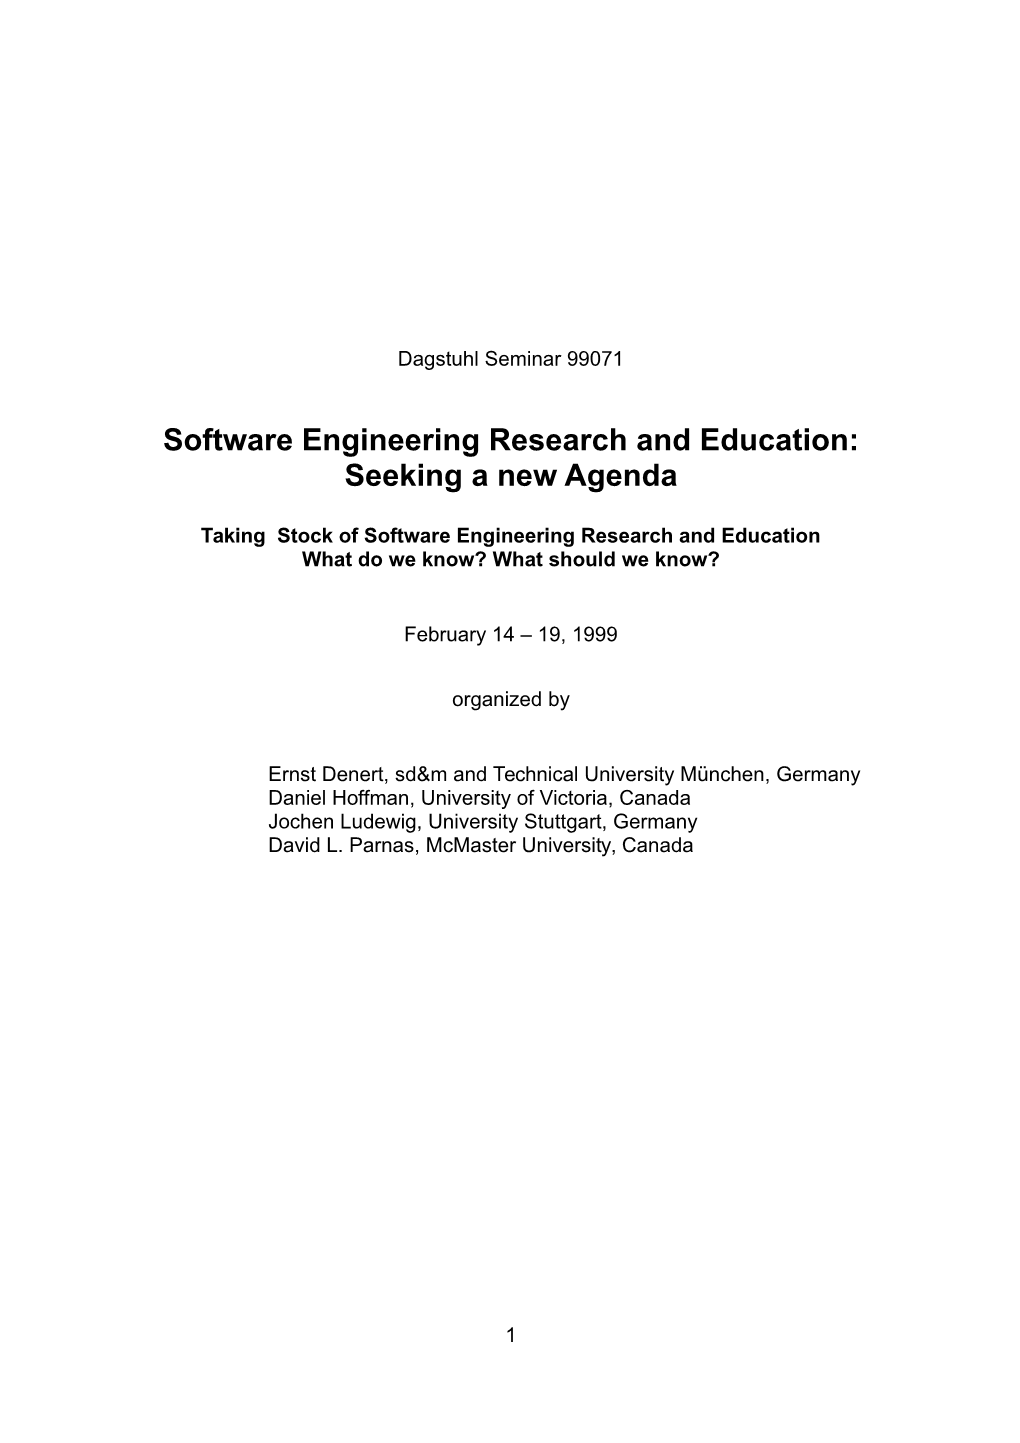 Software Engineering Research and Education: Seeking a New Agenda